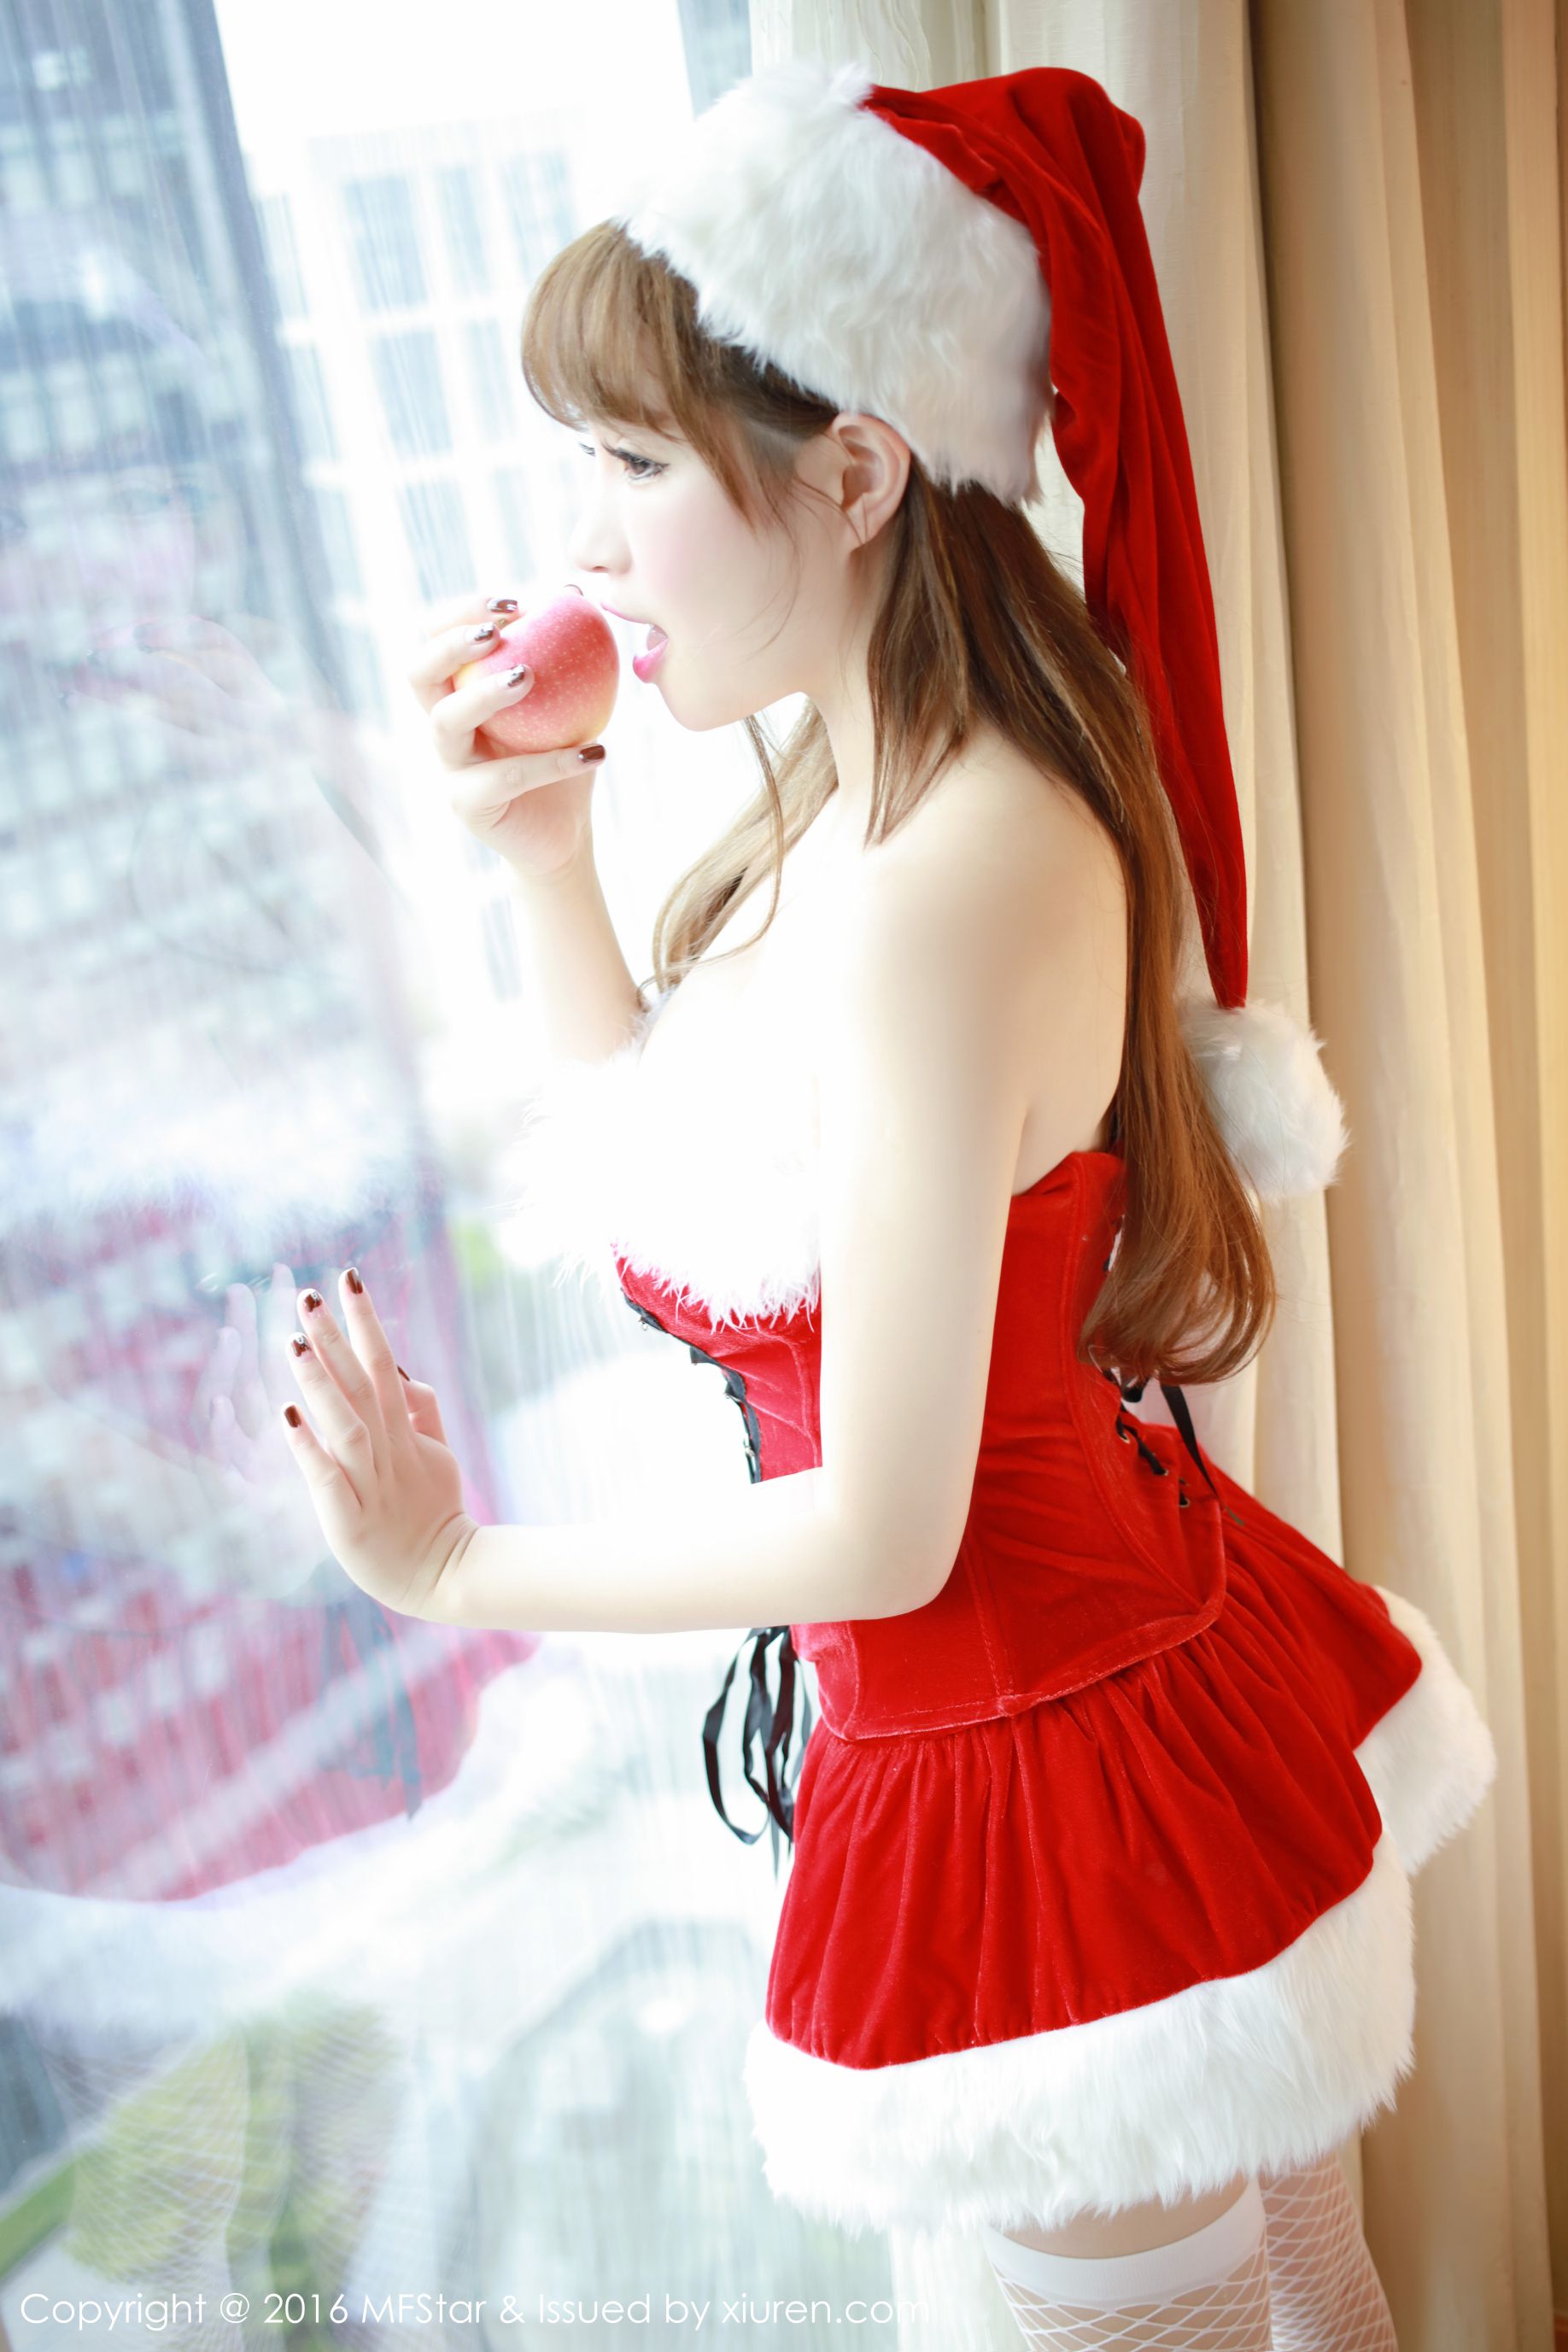 Xu Cake Multi -suits such as Christmas costumes, witch clothes, student outfits, etc. Model Academy MFSTAR VOL.070